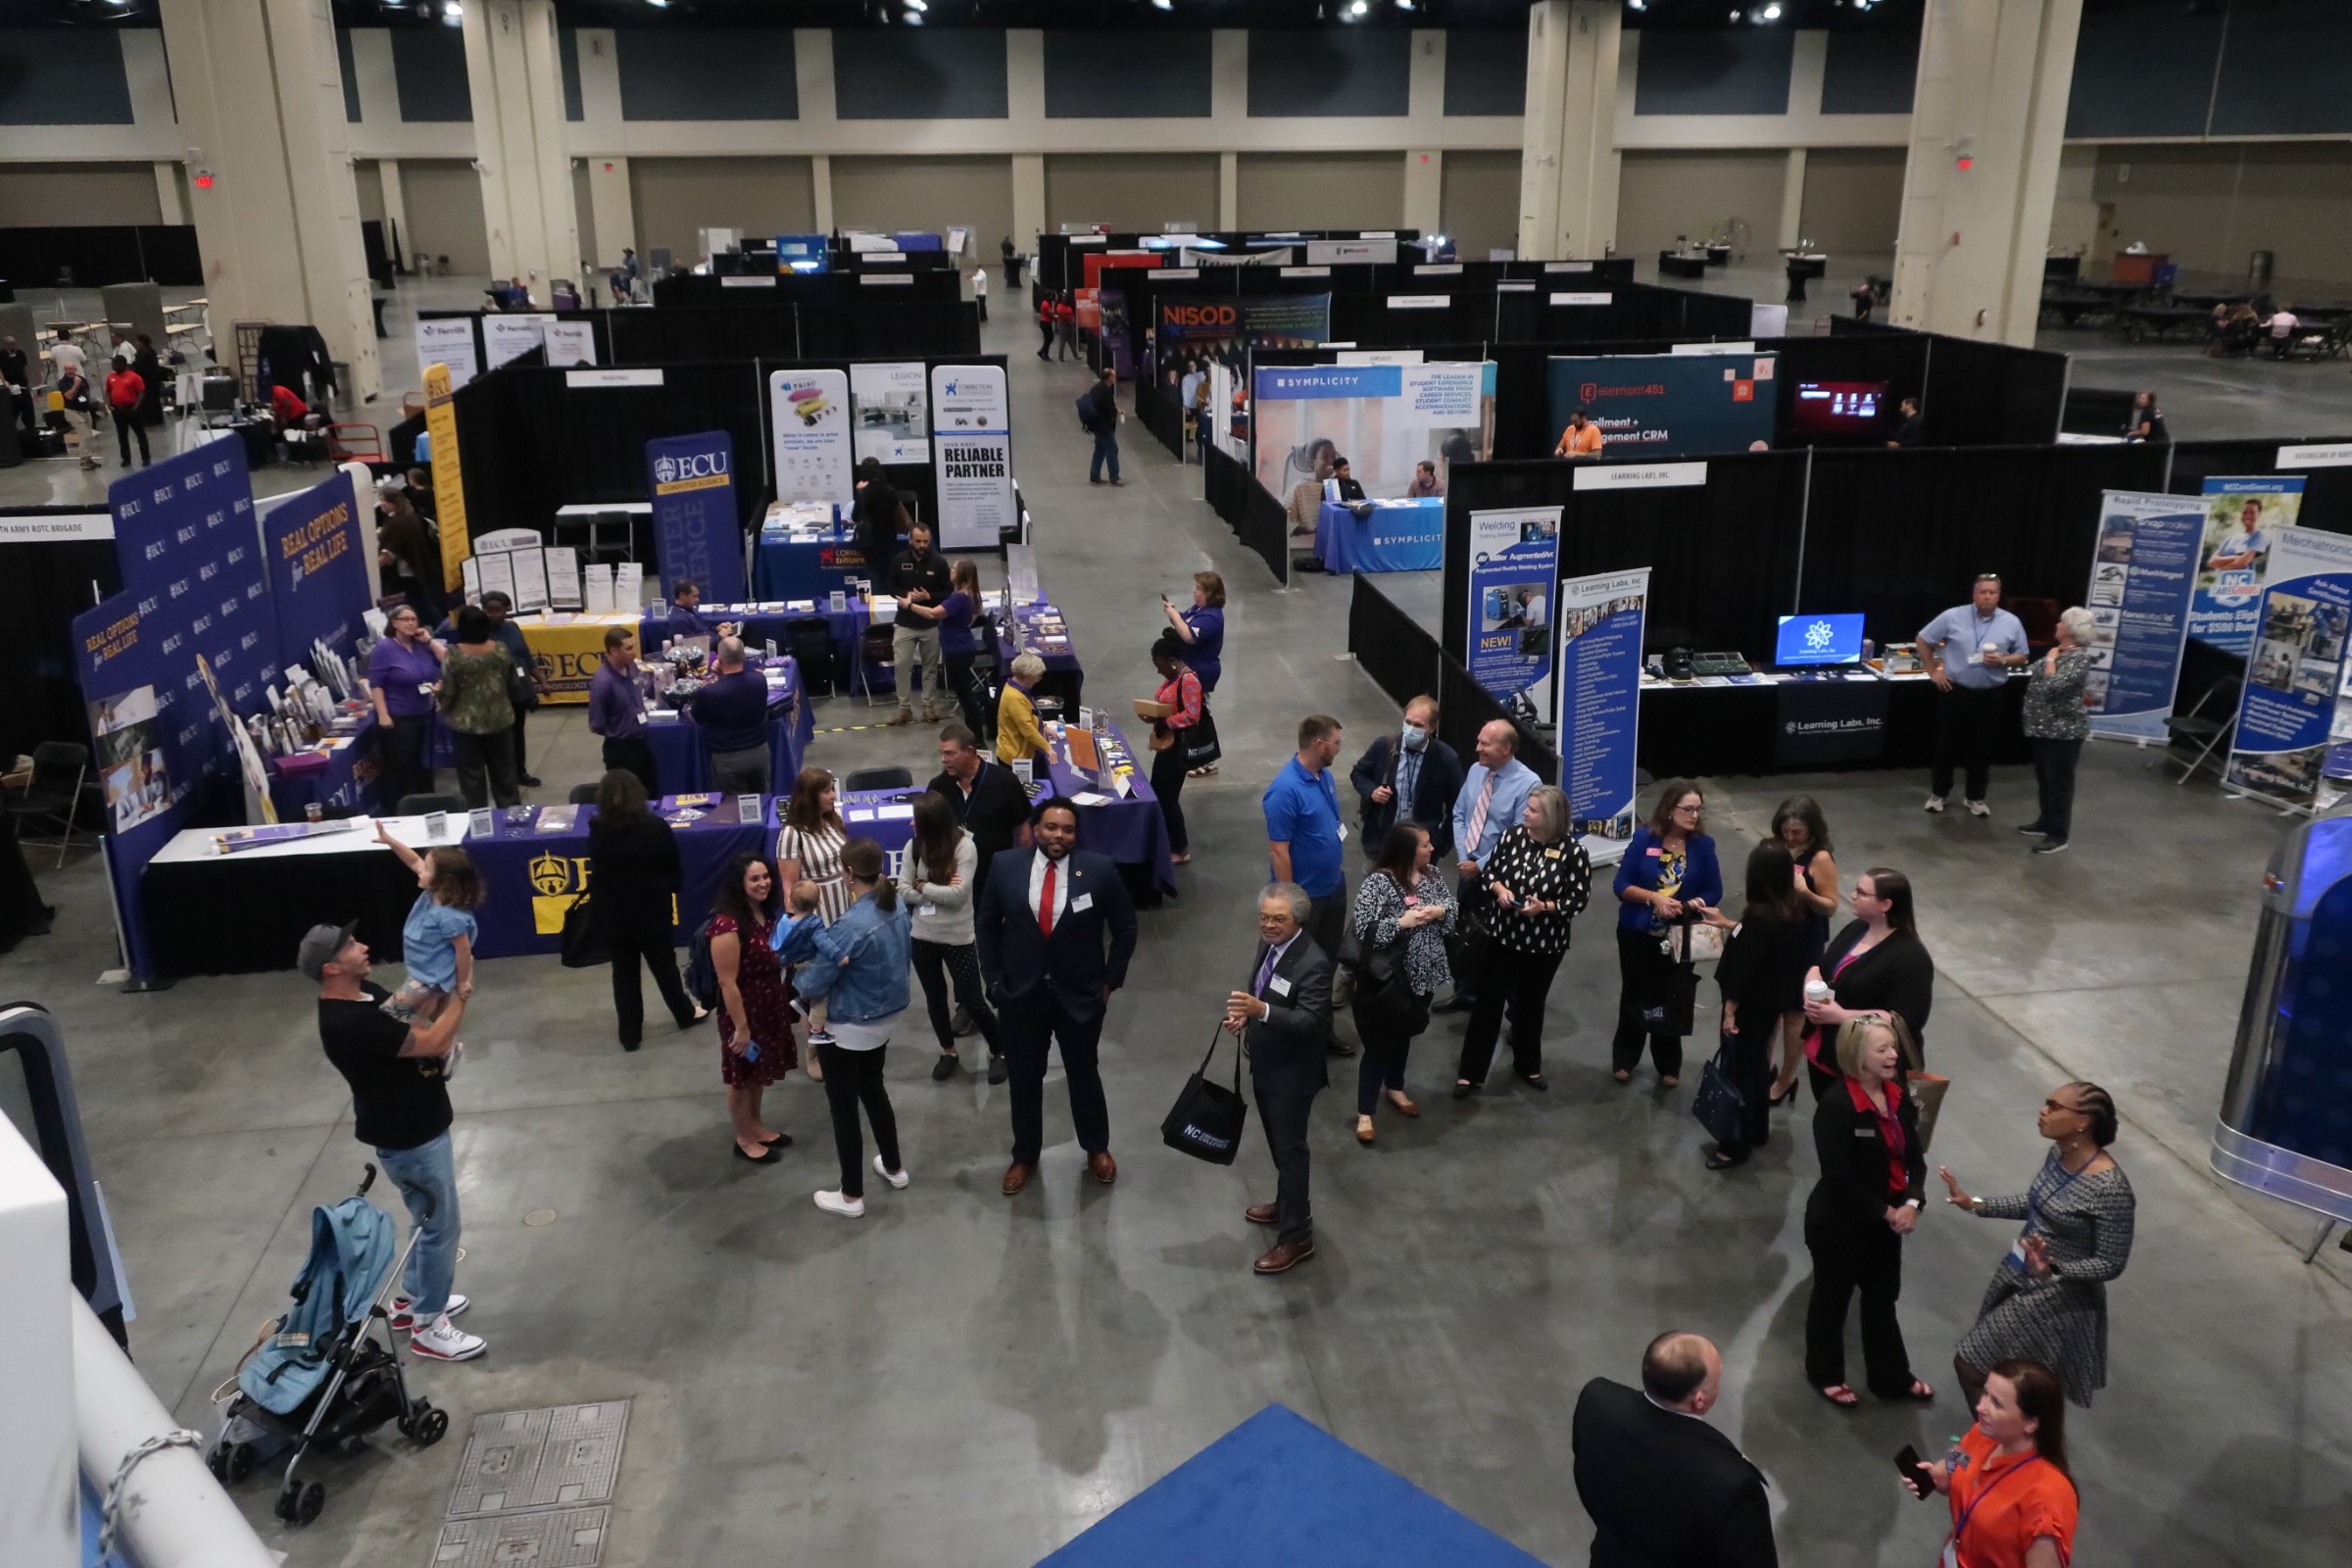 An overhead view of the conference floor, showing various information booths and several dozen attendees